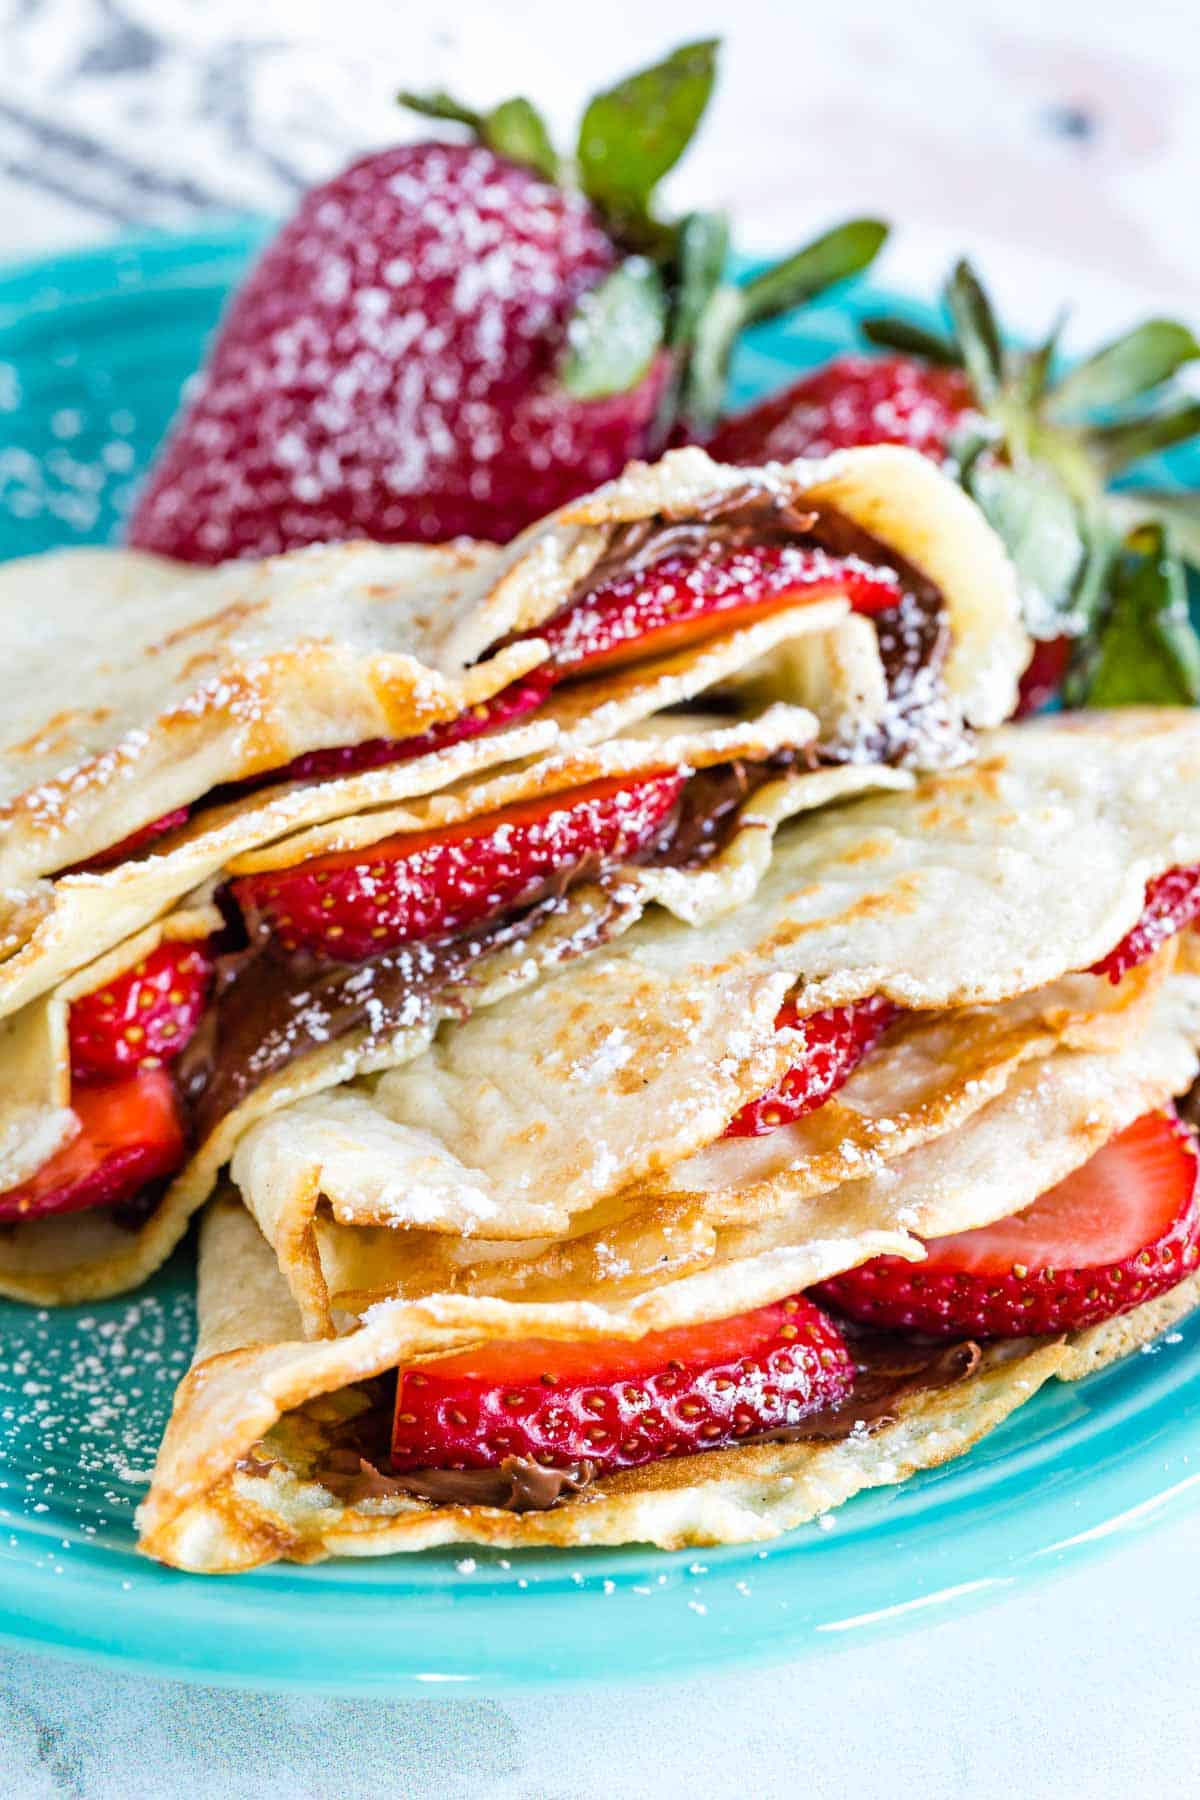 Two strawberry Nutella crepes with fresh strawberries on a blue plate.